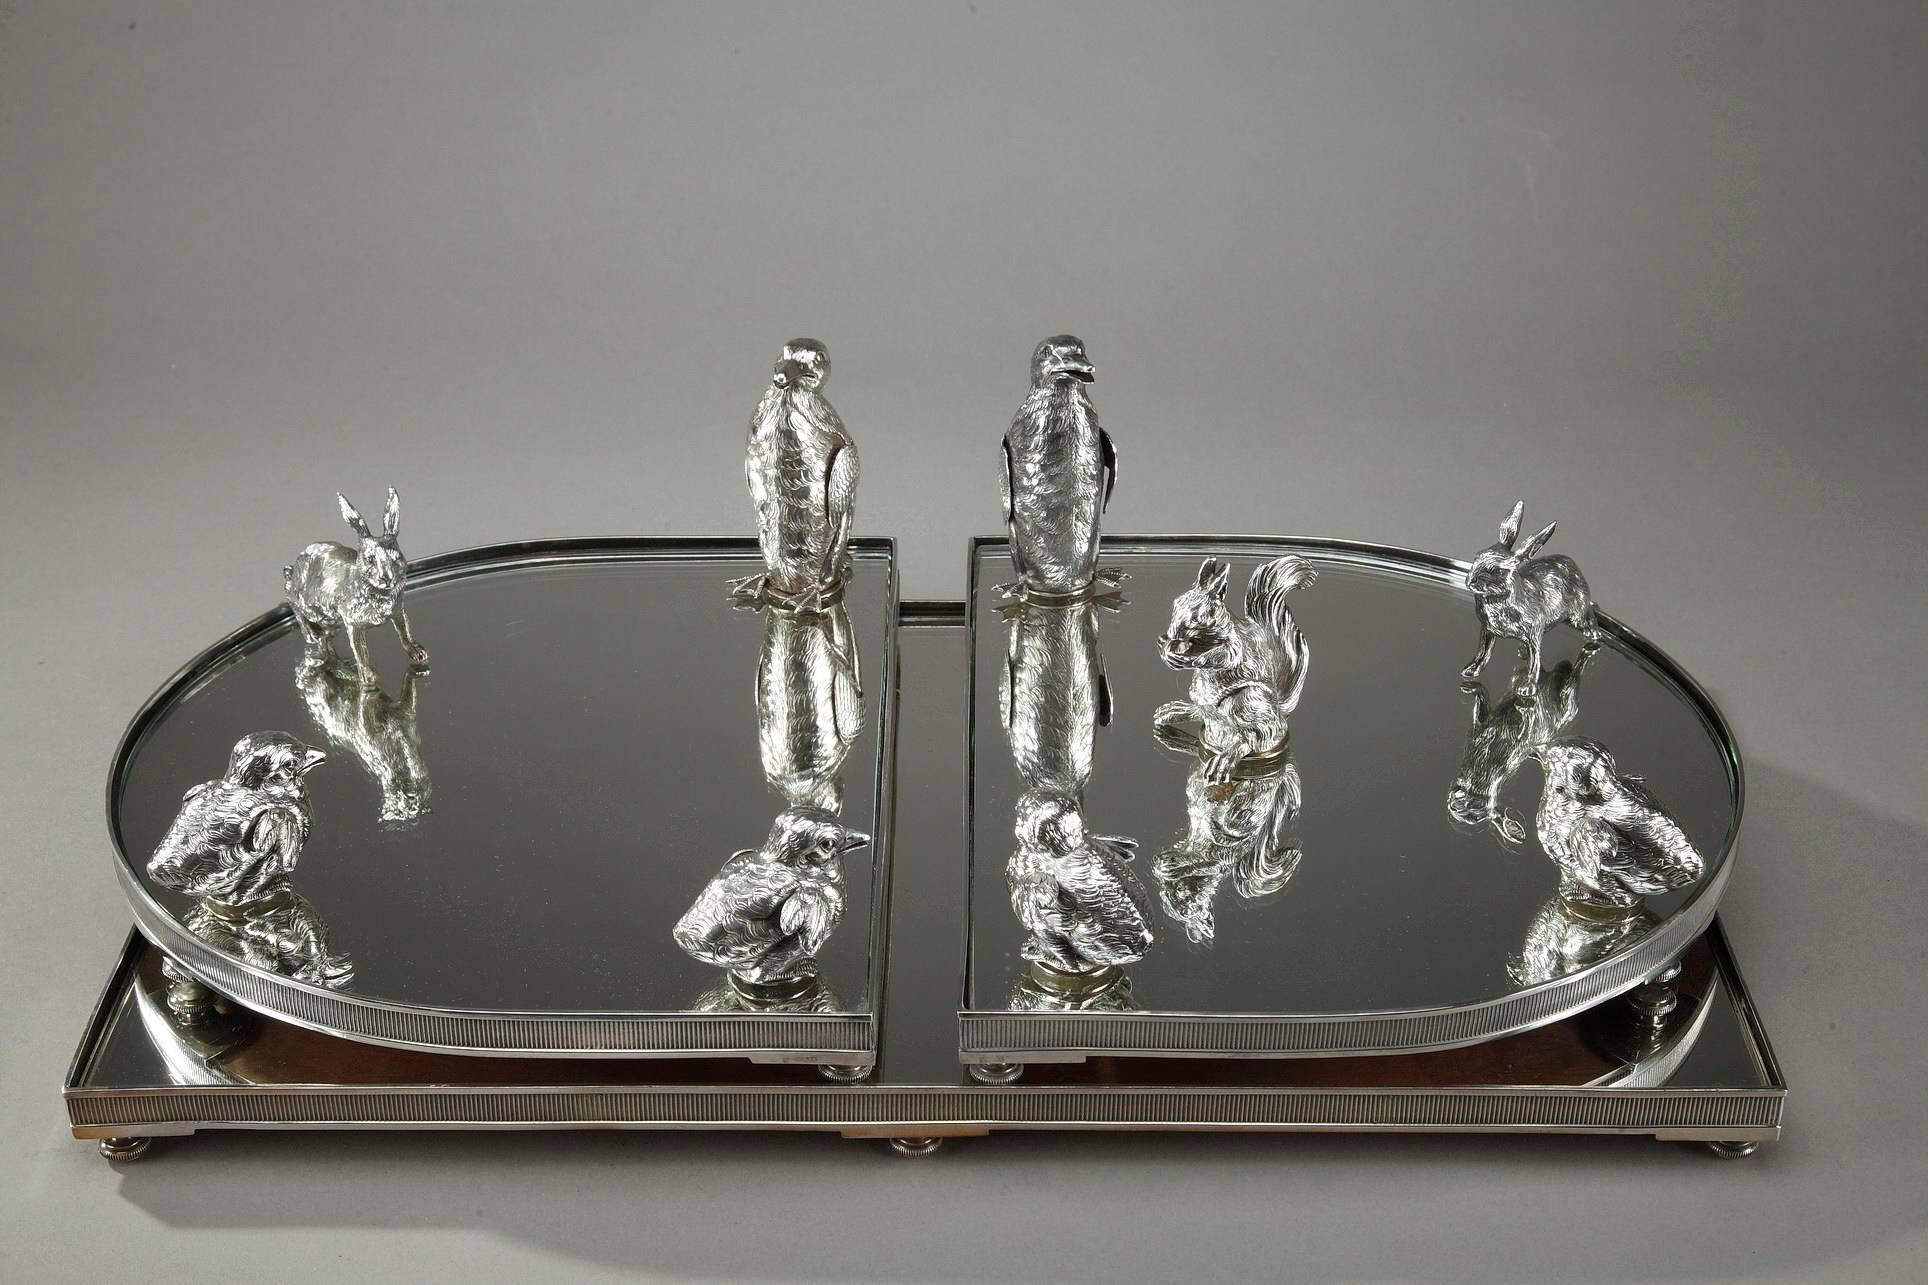 Large antique silver tray and table centrepiece composed of a rectangular central part and two semi-circular parts finely crafted in silver-plated and mirrors, topped by silver hares, squirrels and birds serving as salt and pepper cellar. Several